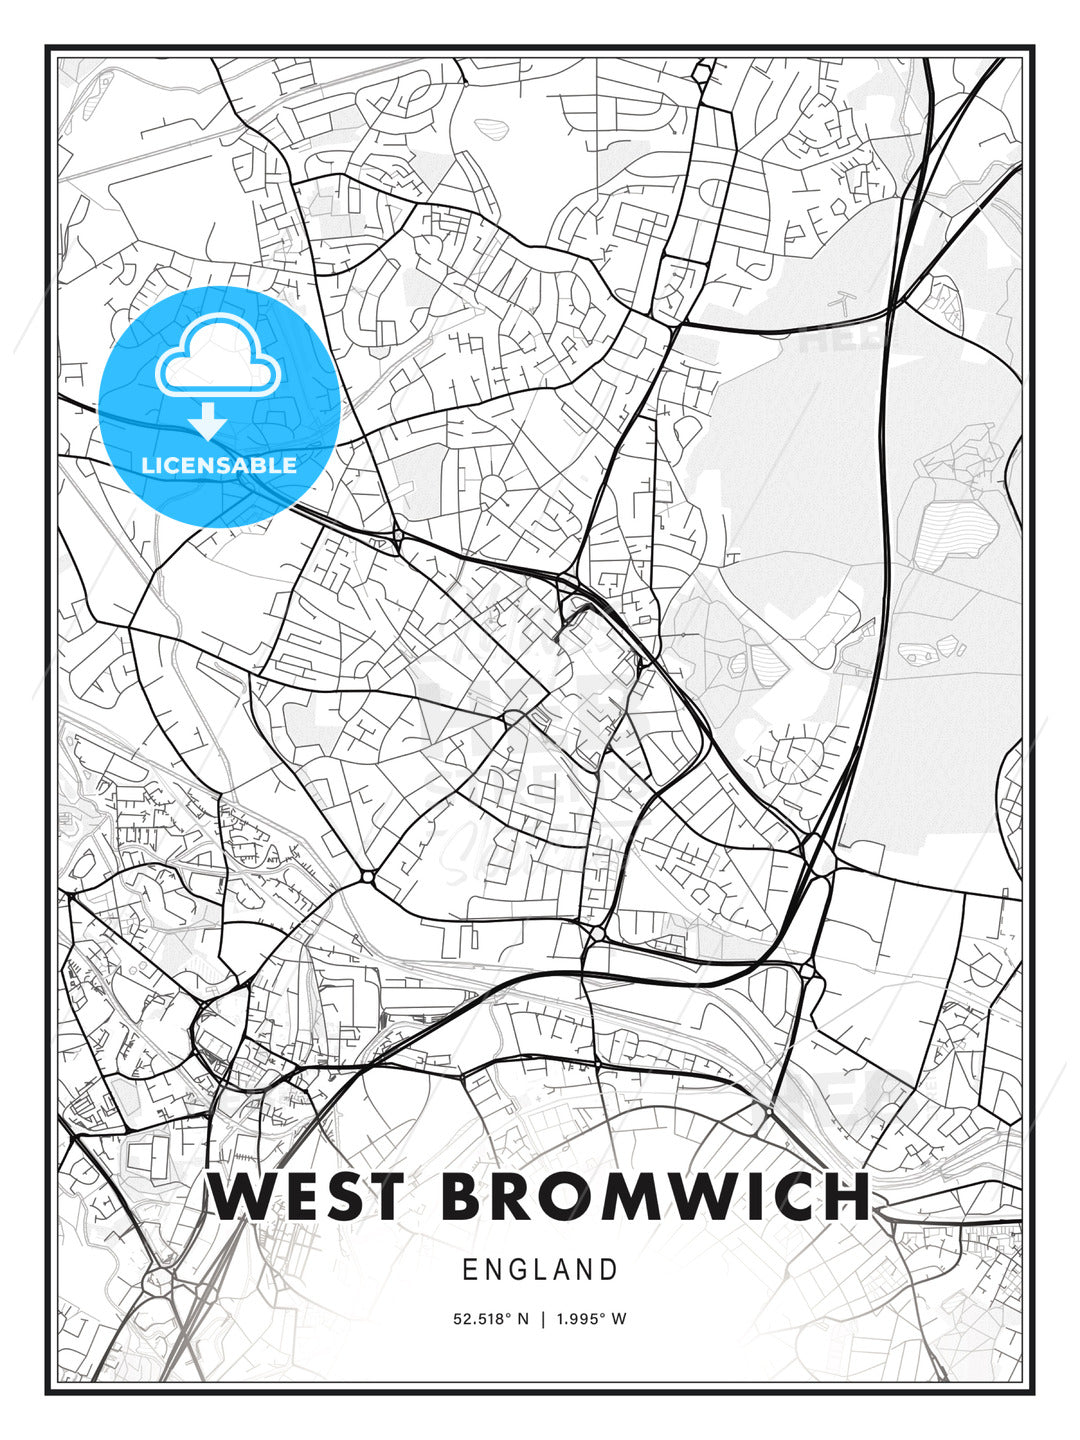 West Bromwich, England, Modern Print Template in Various Formats - HEBSTREITS Sketches